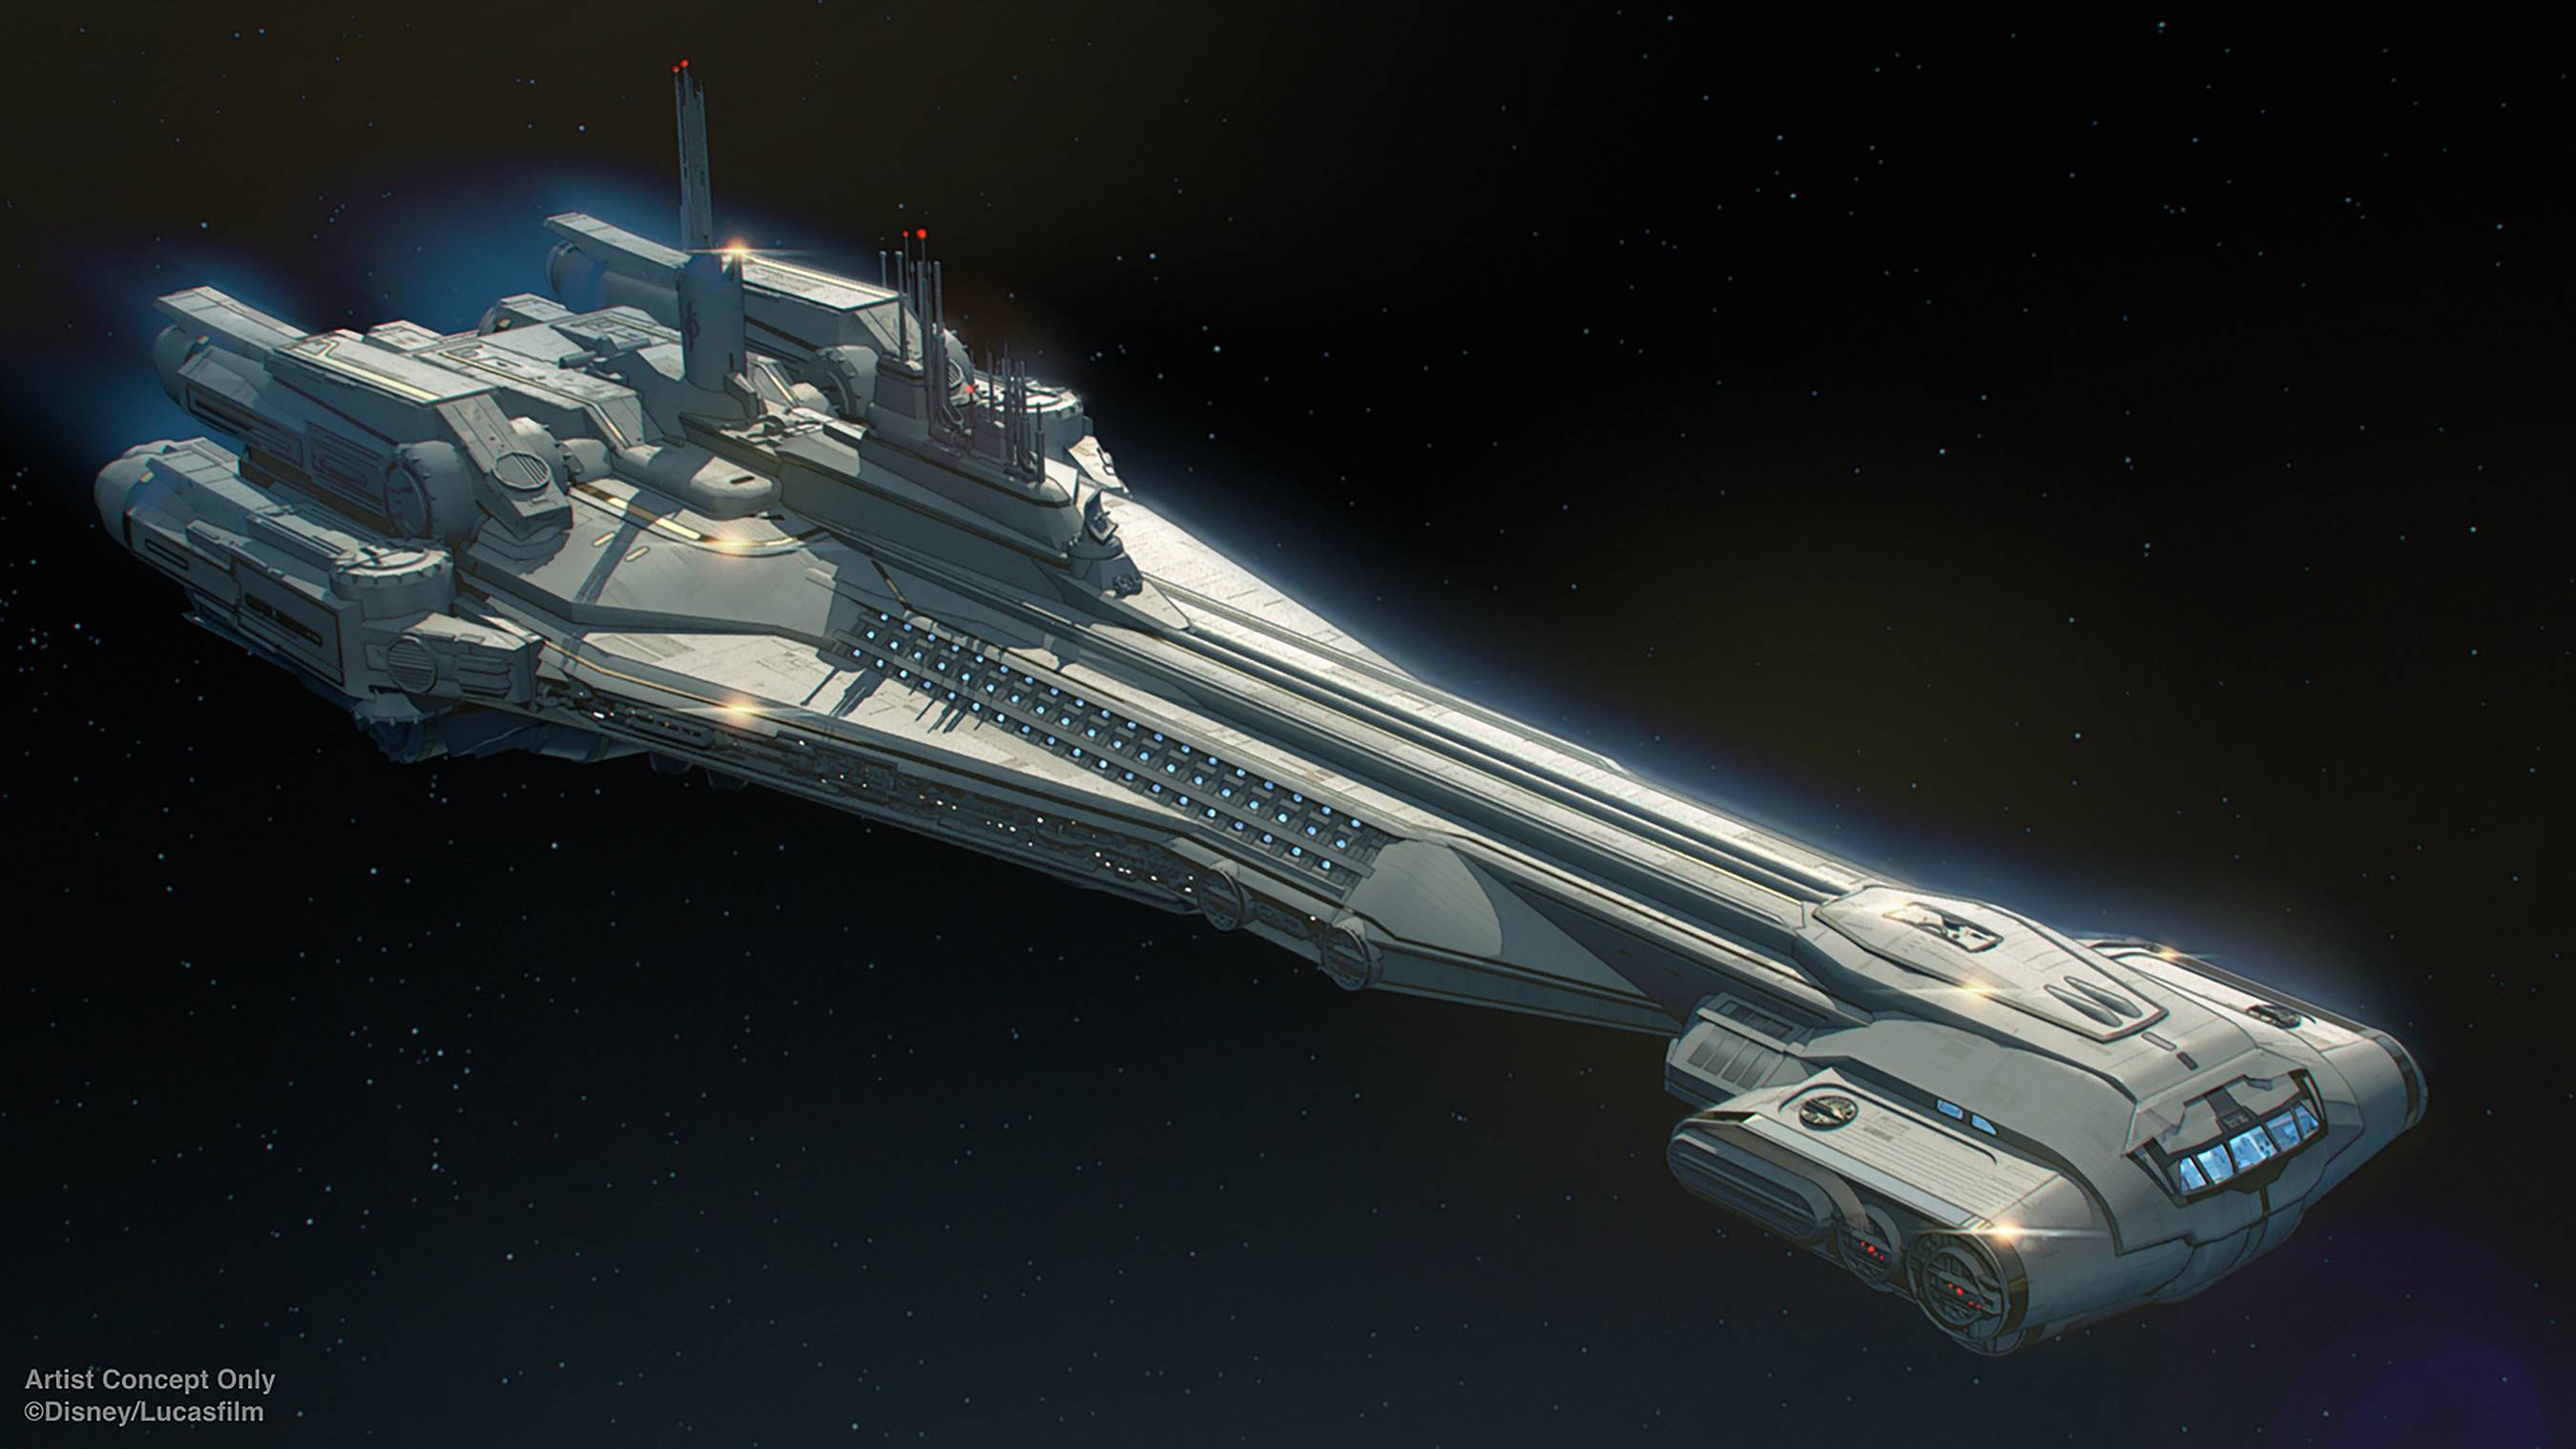 Star Wars Galactic Starcruiser concept art and model